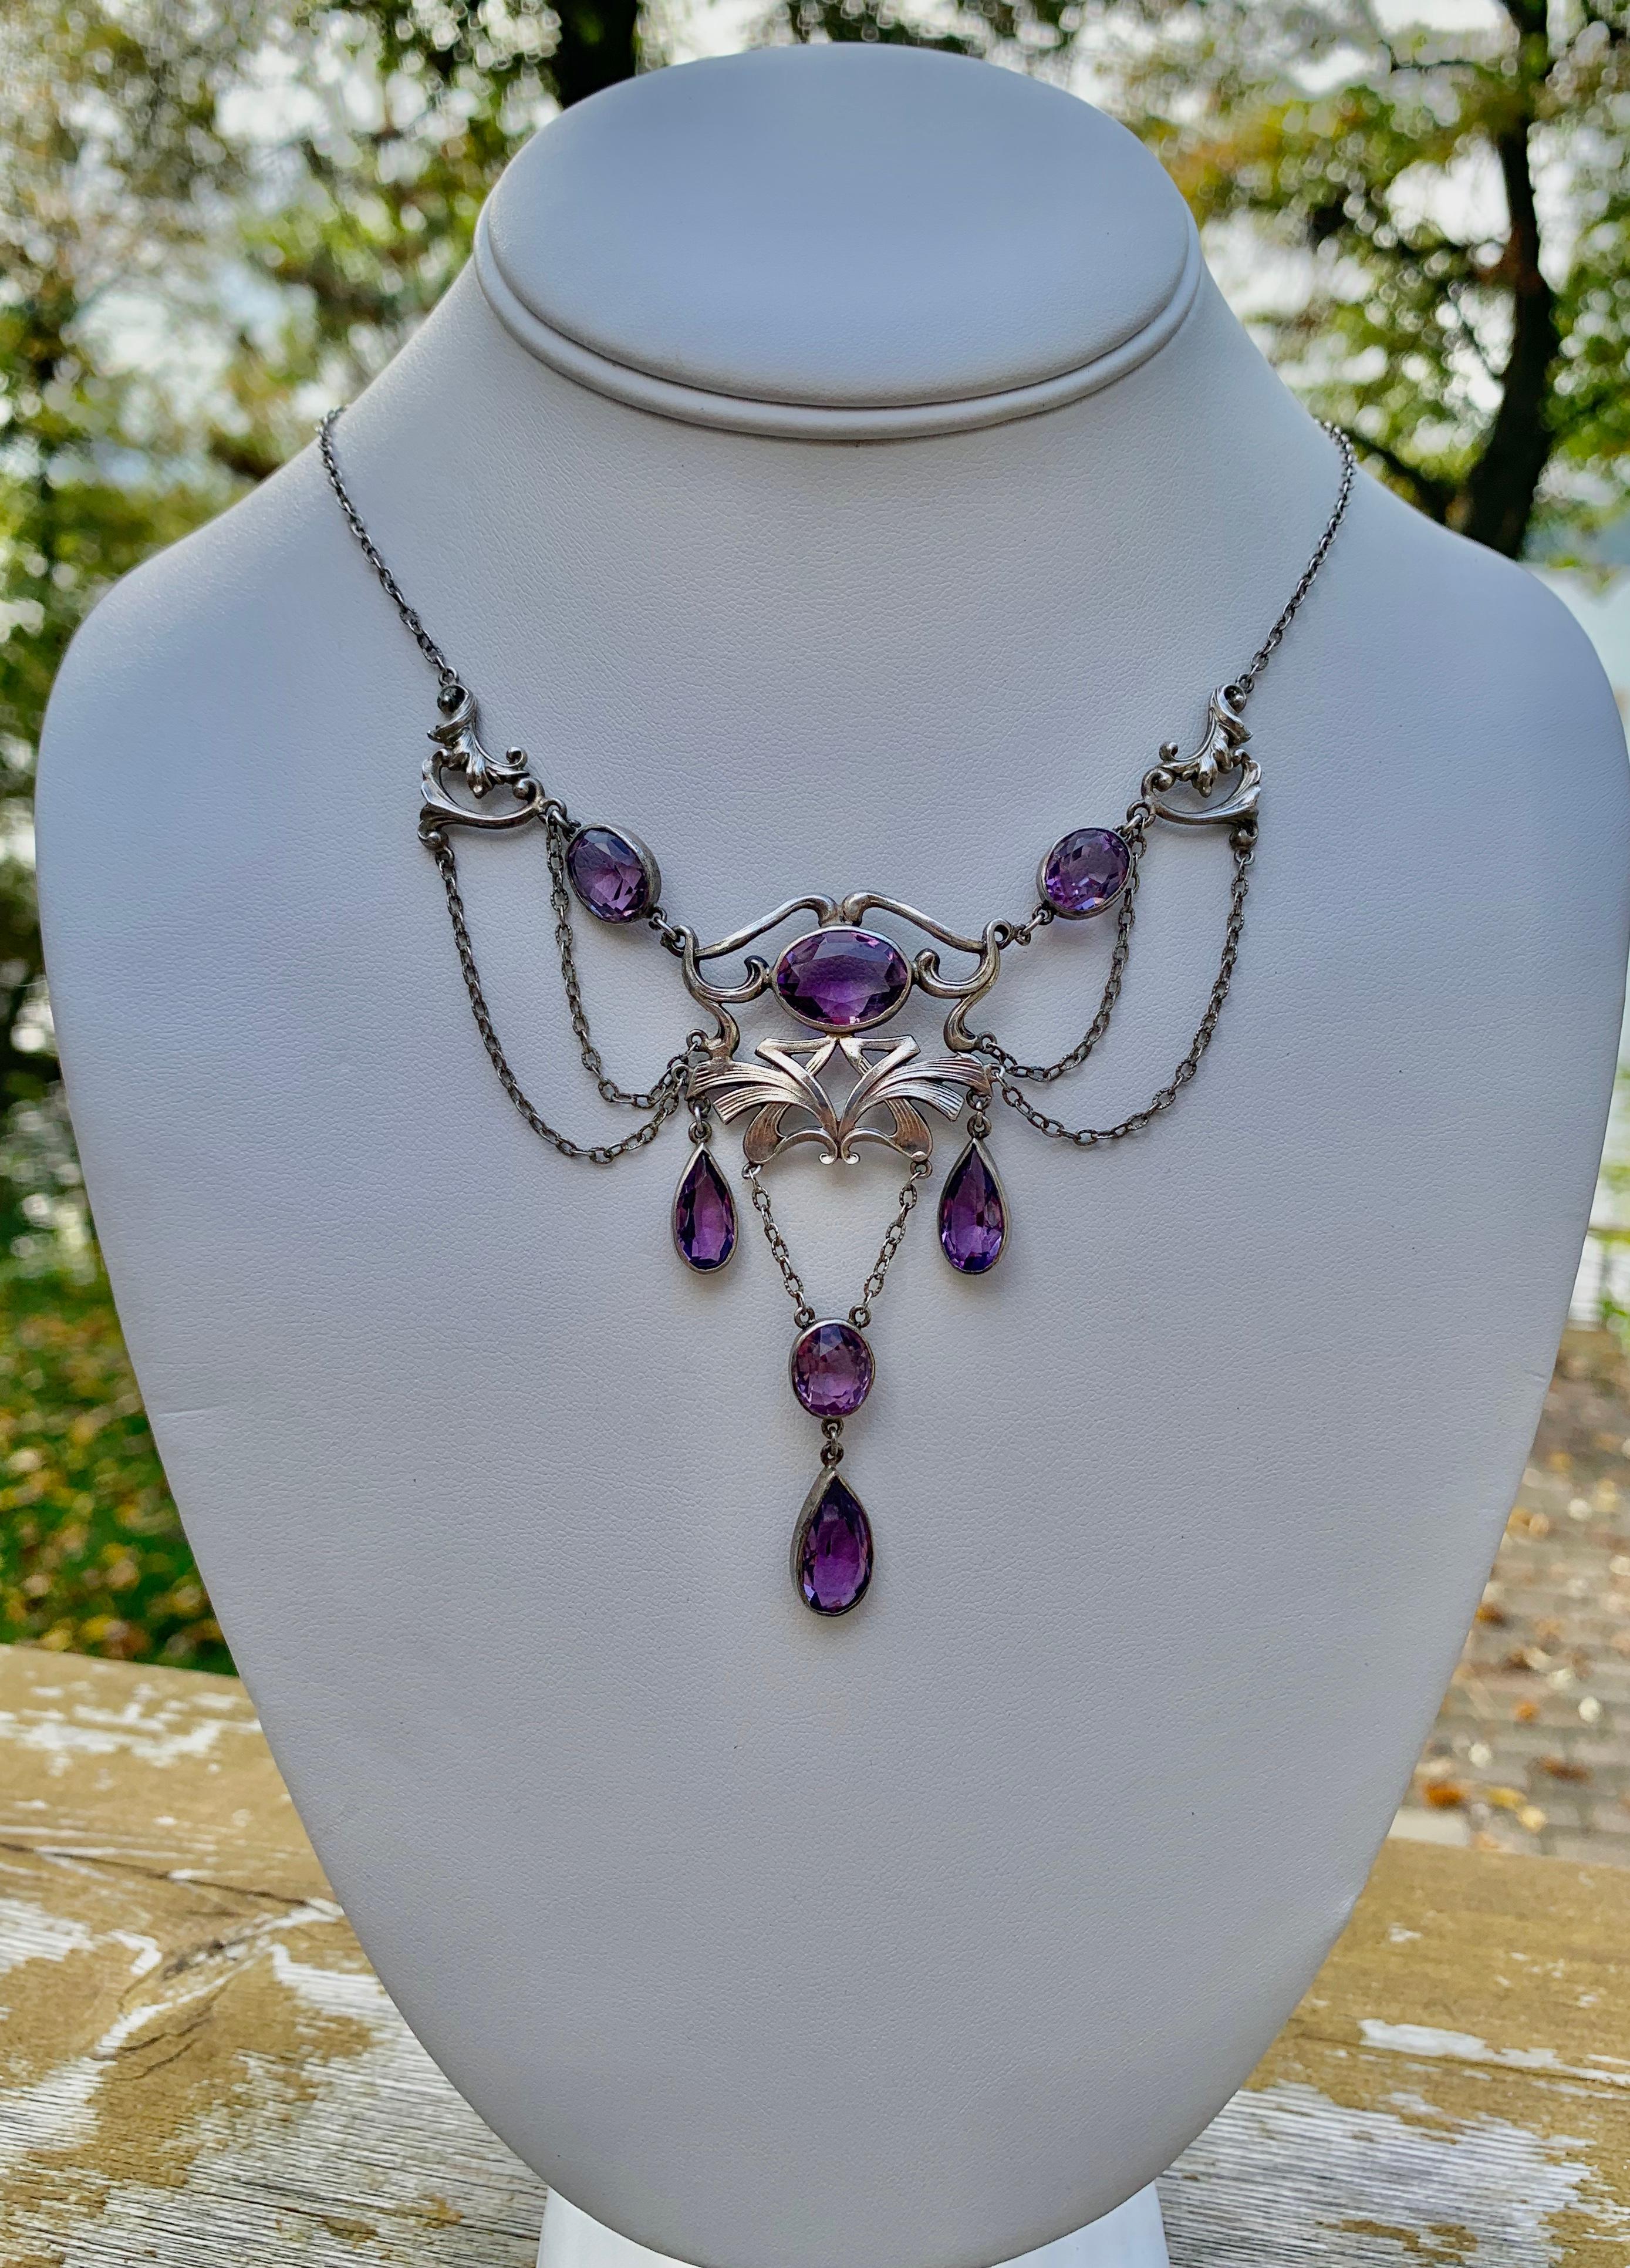 THIS IS A RARE MUSEUM QUALITY ART NOUVEAU - BELLE EPOQUE FESTOON NECKLACE WITH THE MOST GORGEOUS NATURAL OVAL AND PEAR SHAPE AMETHYST GEMS SET IN A GORGEOUS SCROLL ACANTHUS LEAF MOTIF SETTING IN AN OPEN WORK FESTOON SWAG DESIGN IN STERLING SILVER